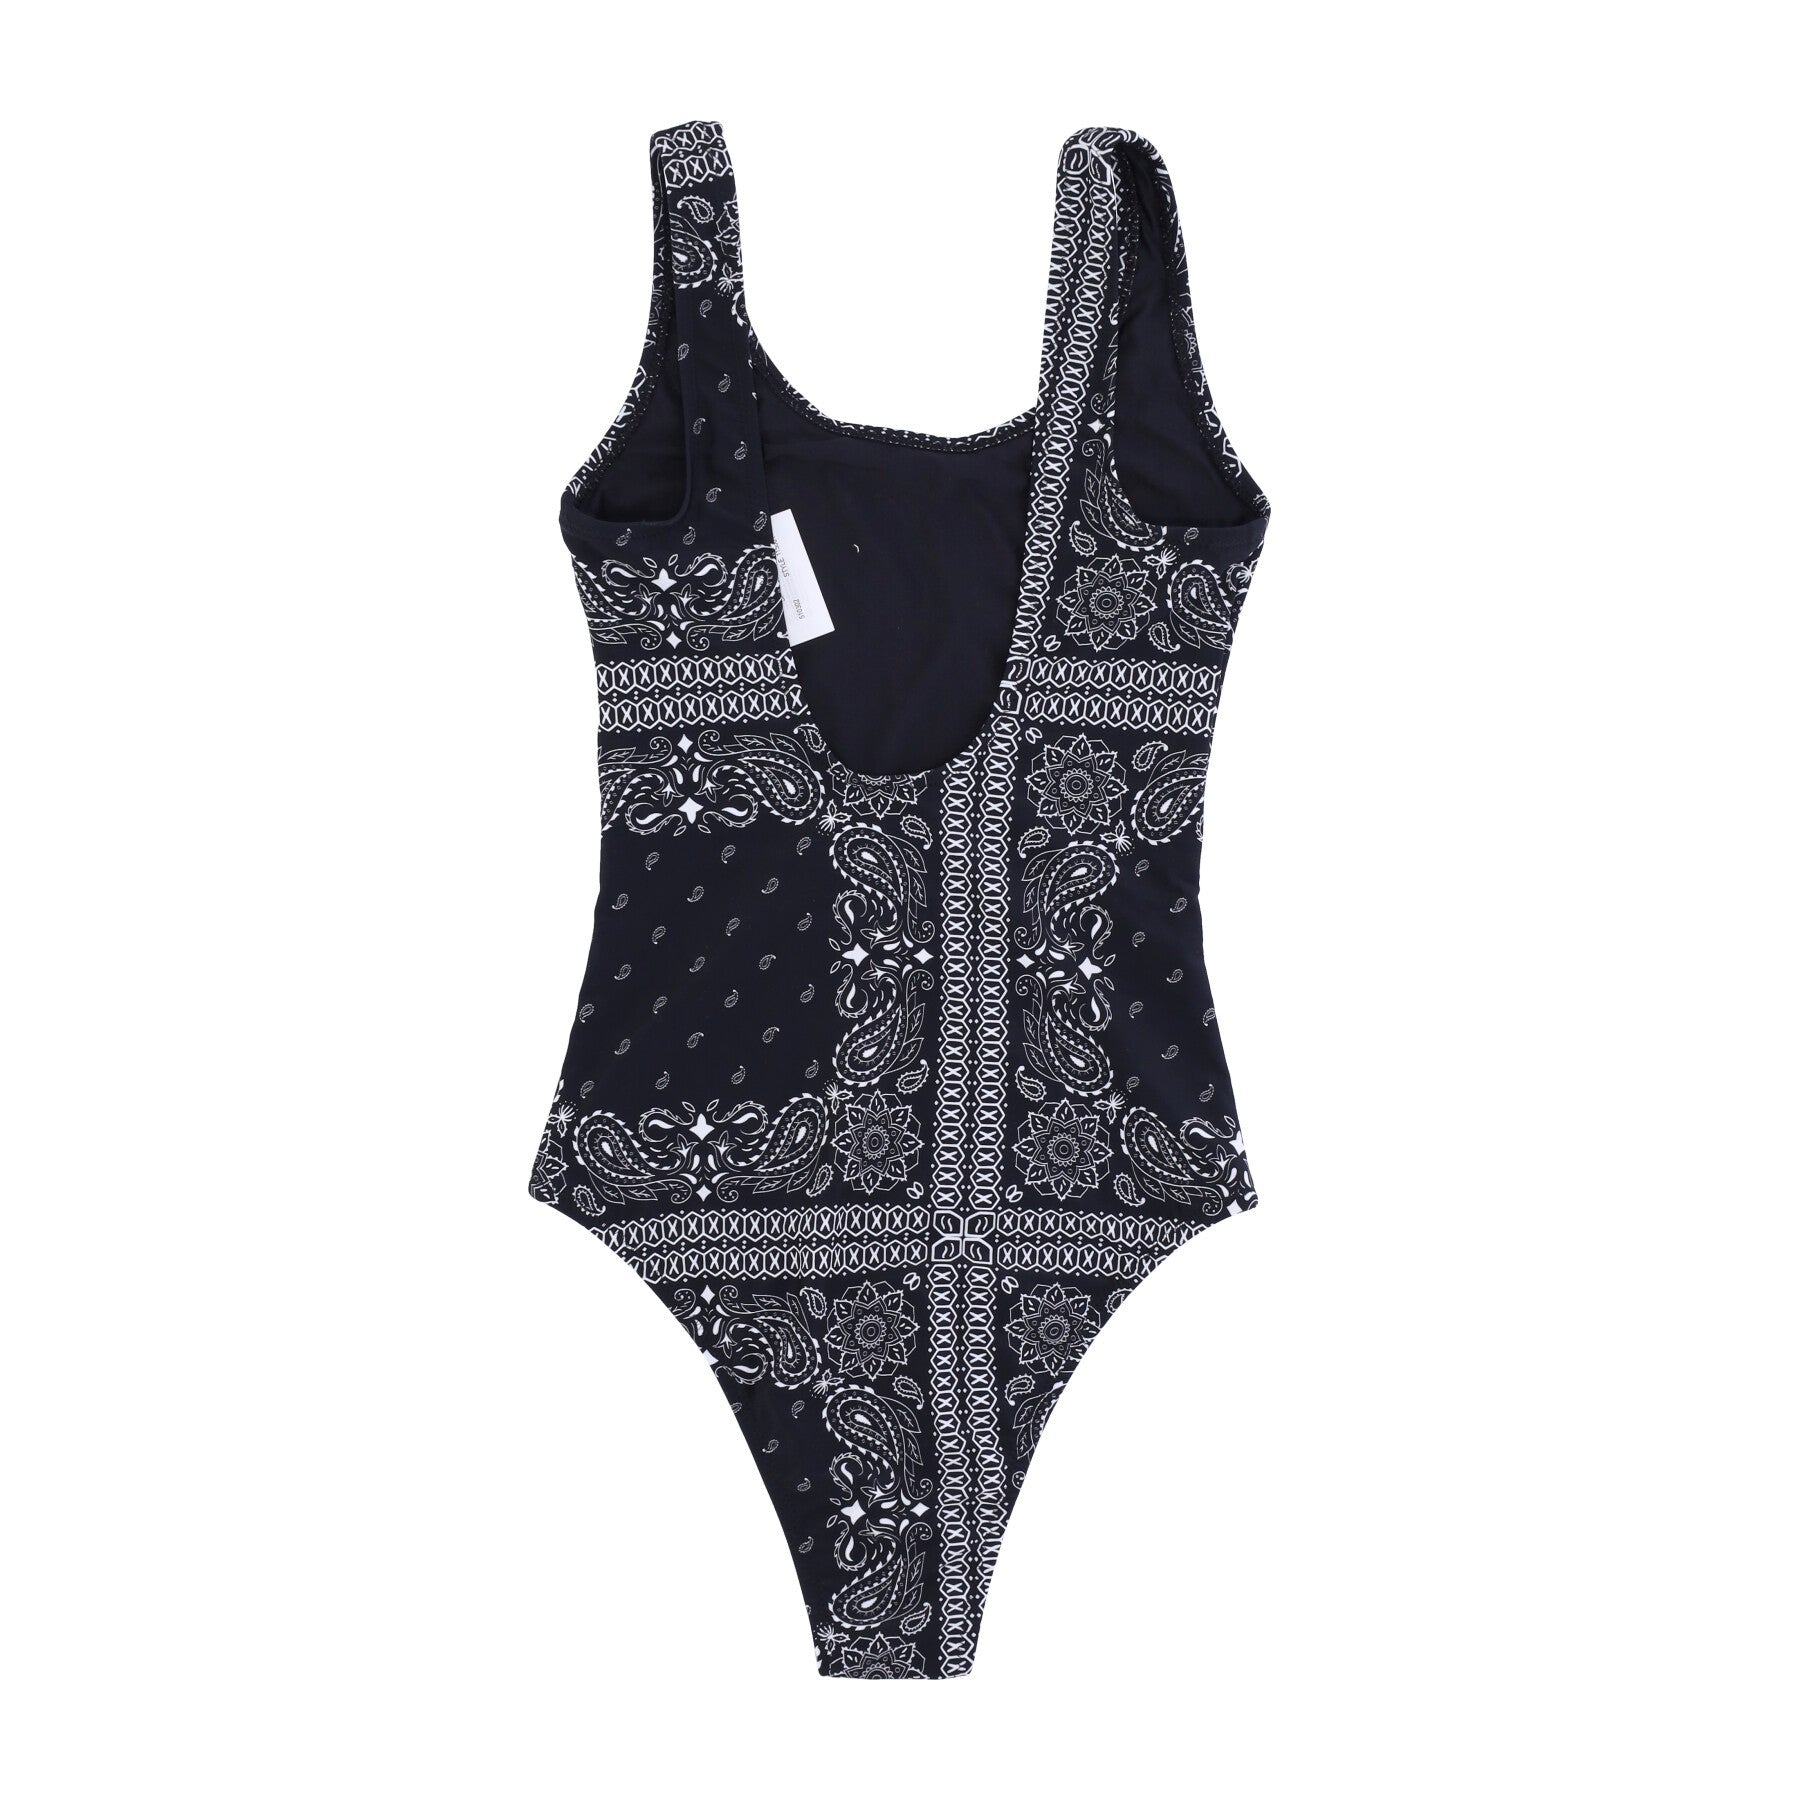 Women's One Piece Swimsuit Swimming Suit Black/allover